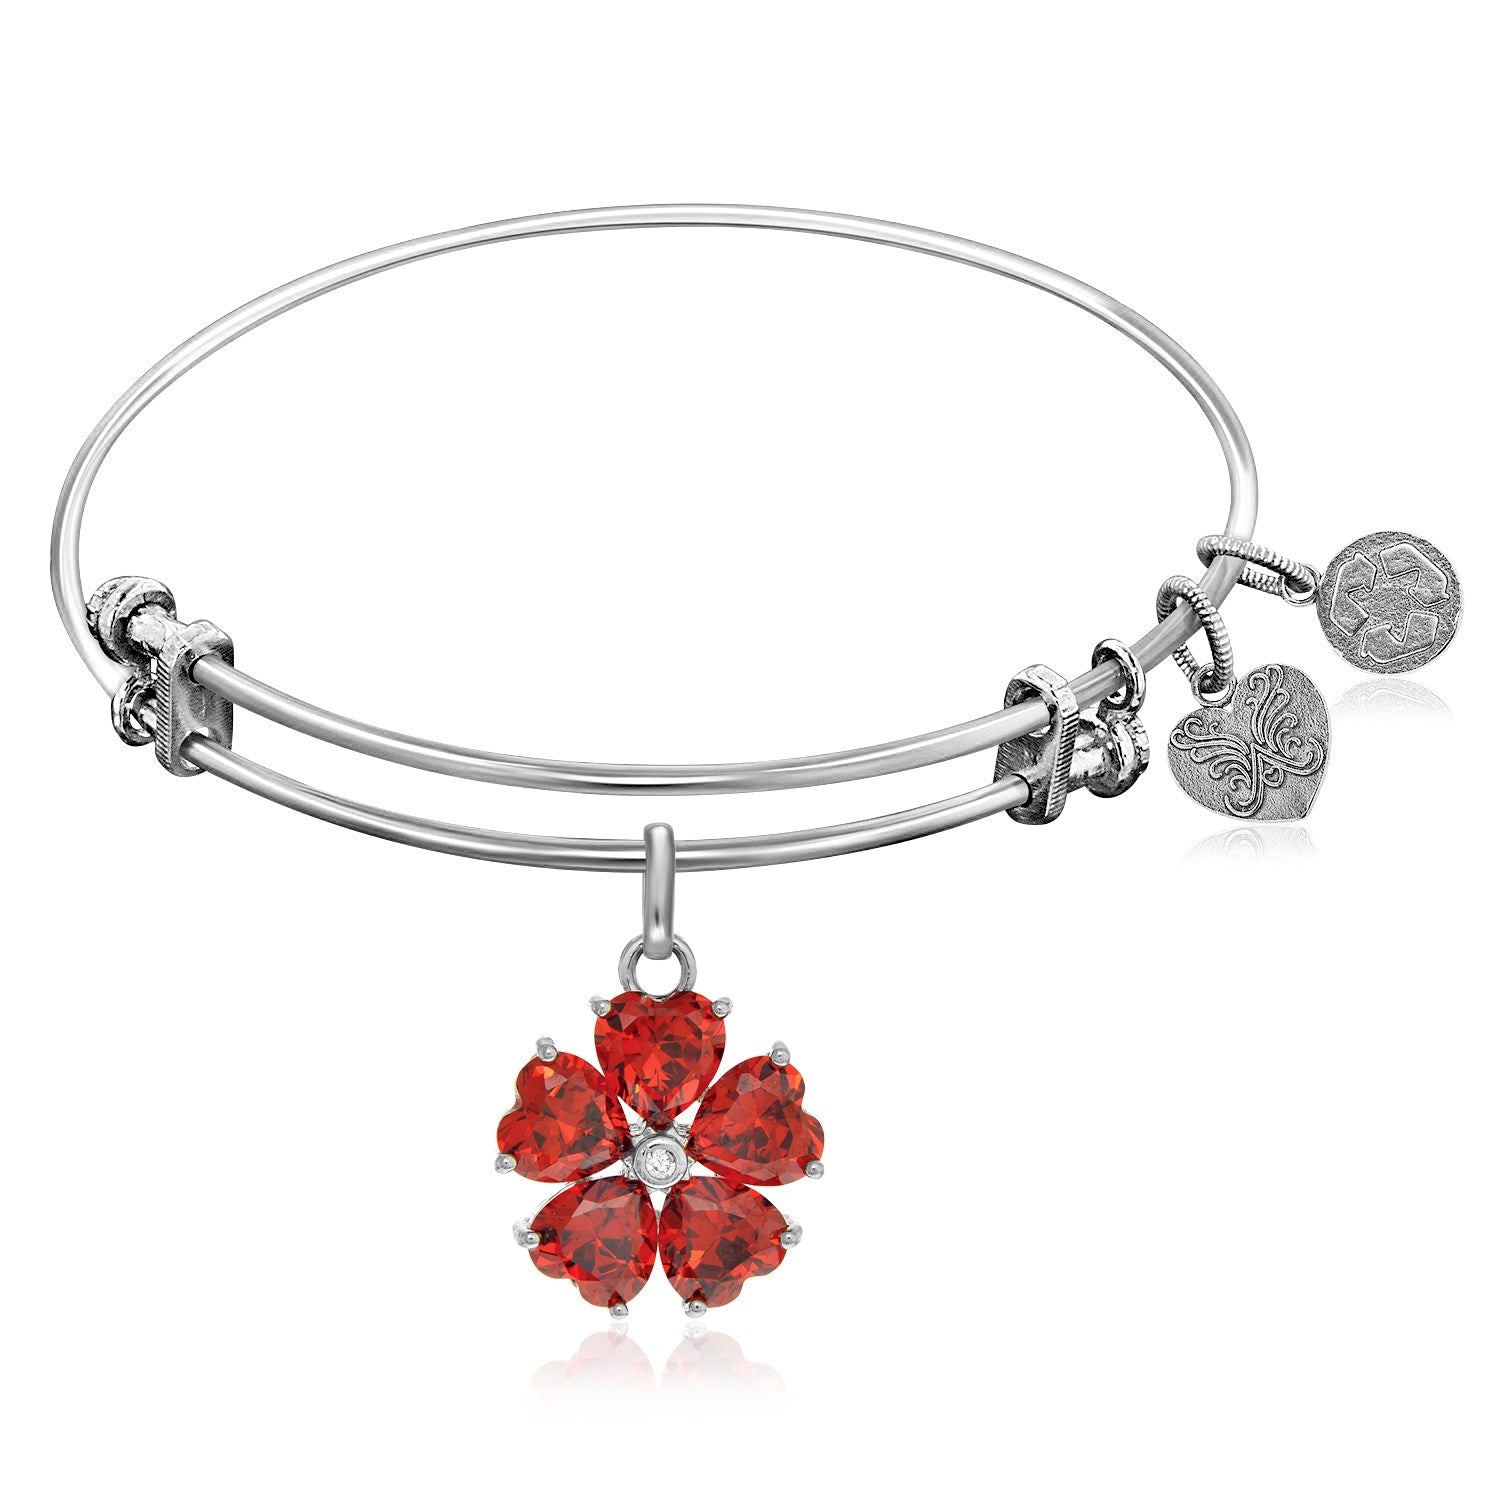 Expandable White Tone Brass Bangle with Red and White Cubic Zirconia Flower